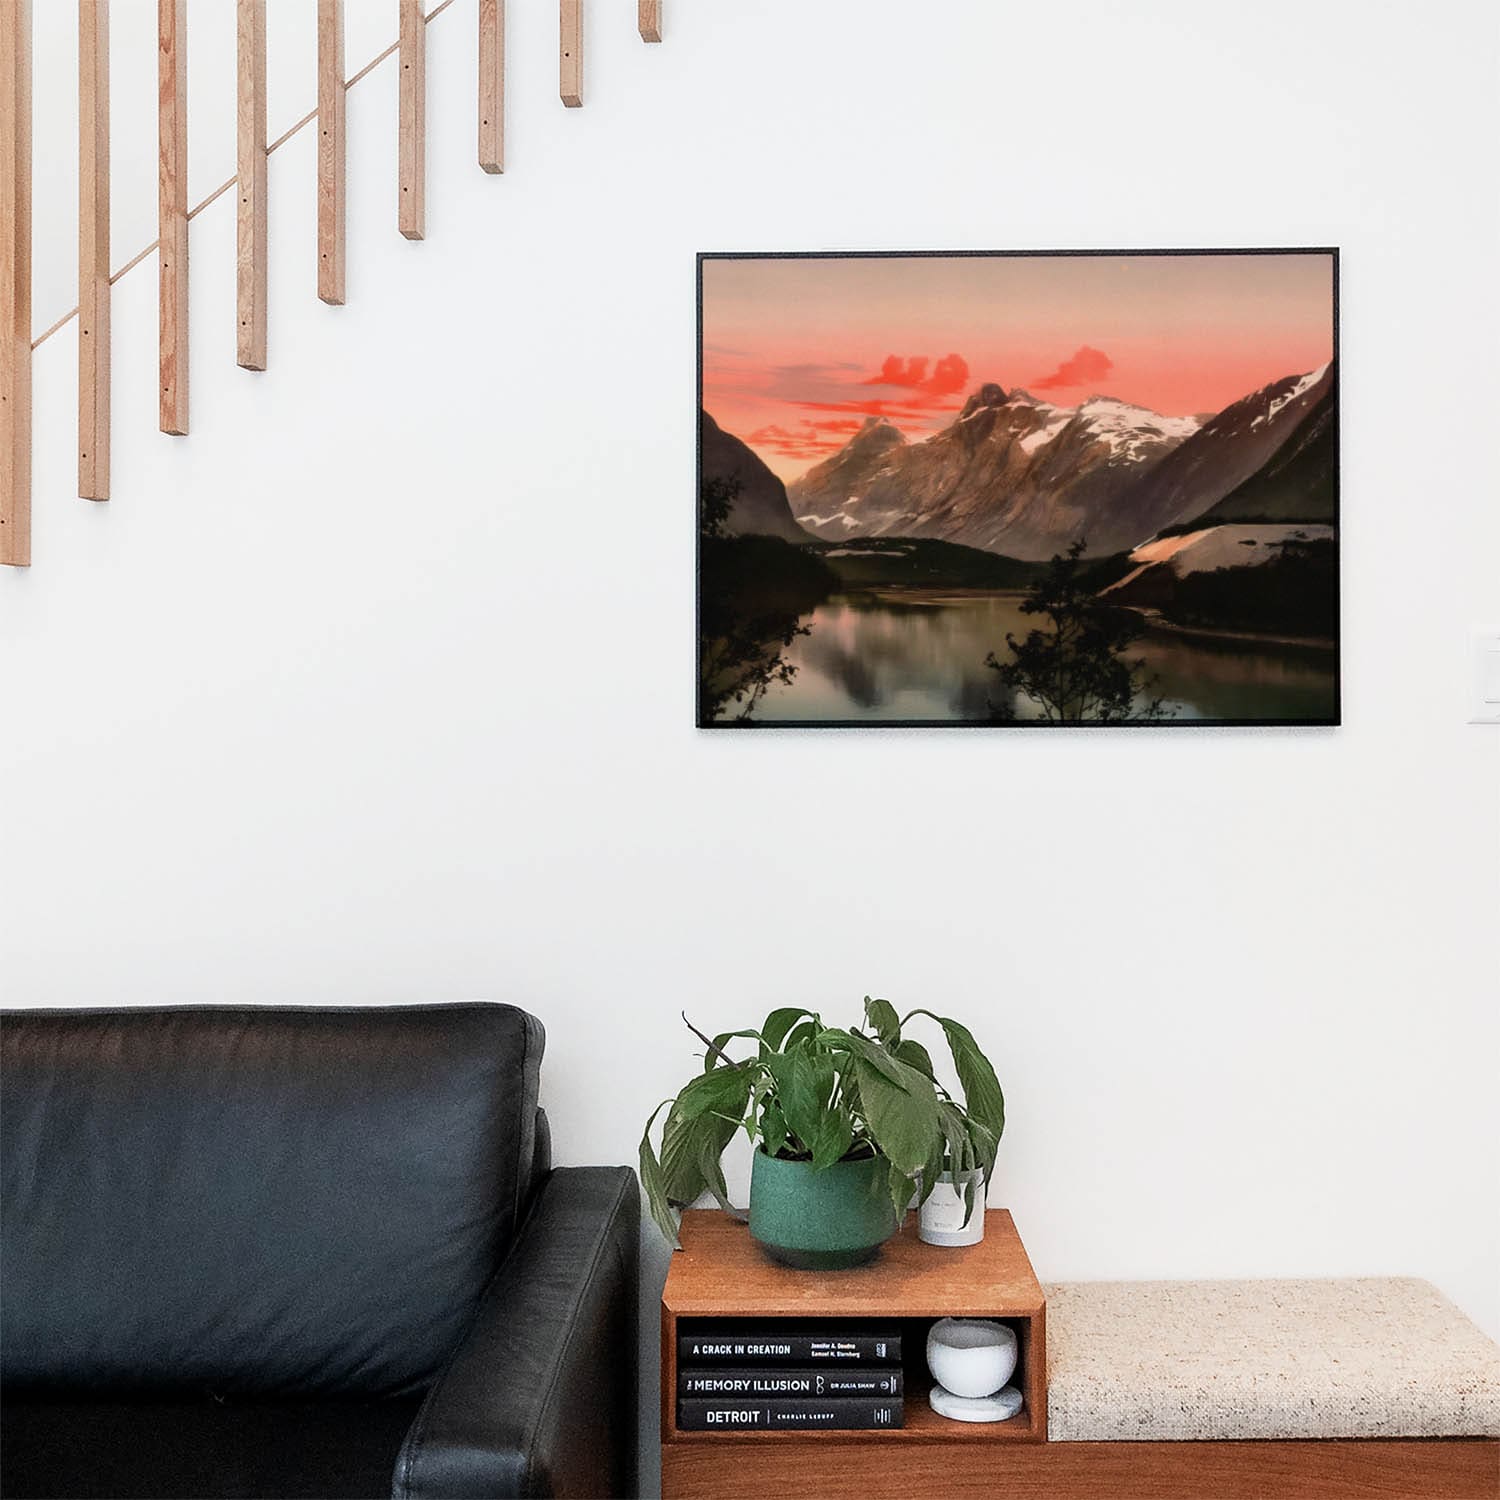 Living space with a black leather couch and table with a plant and books below a staircase featuring a framed picture of Mountains and Lake Nature